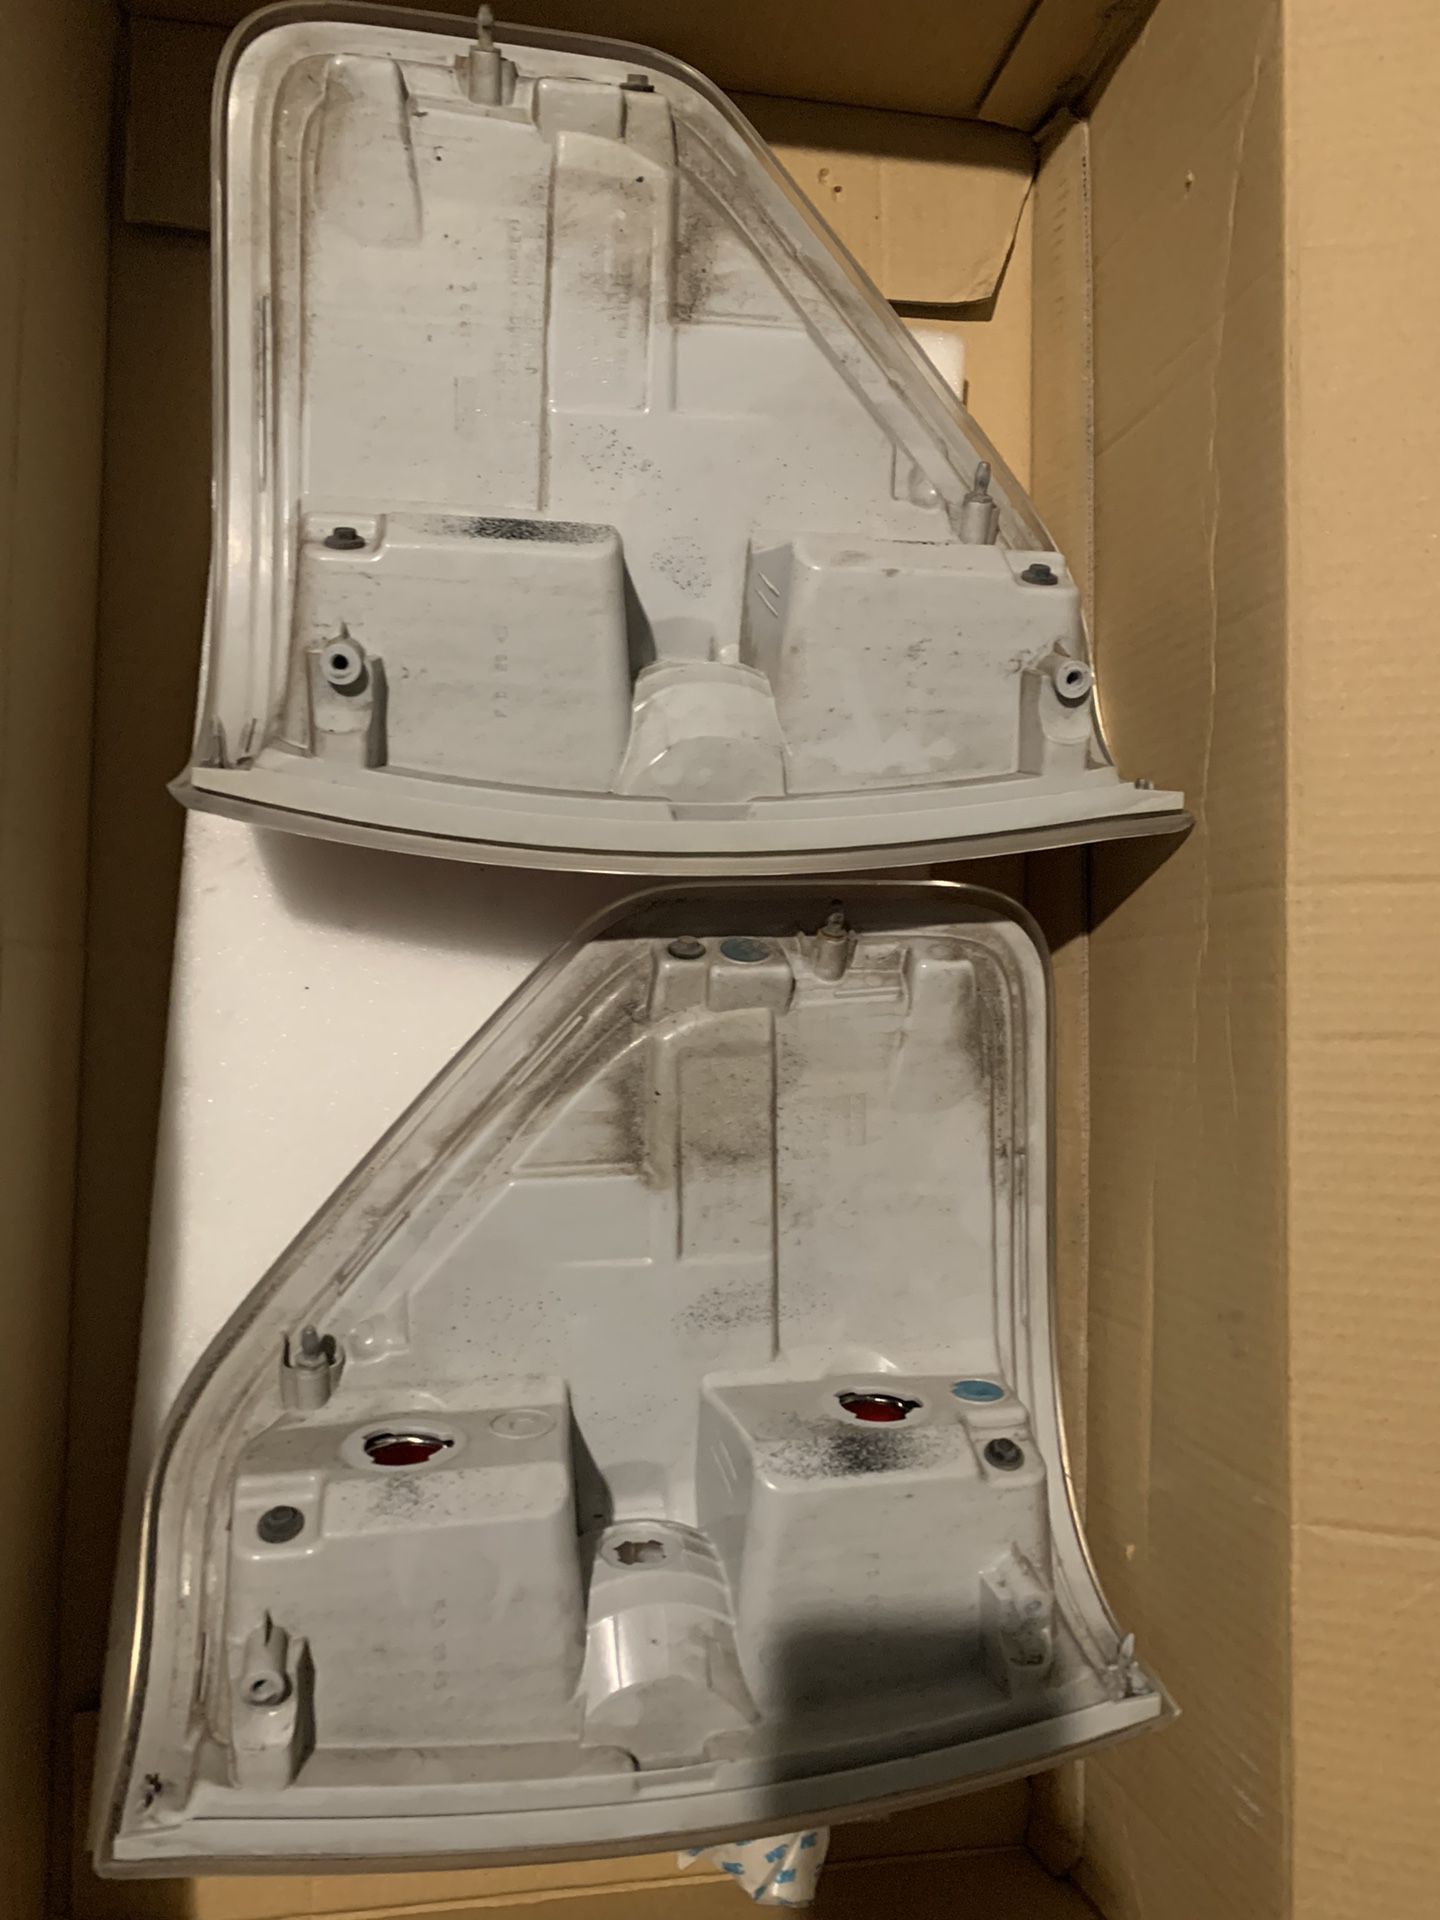 2012 F150 Factory OEM Taillights (pair)